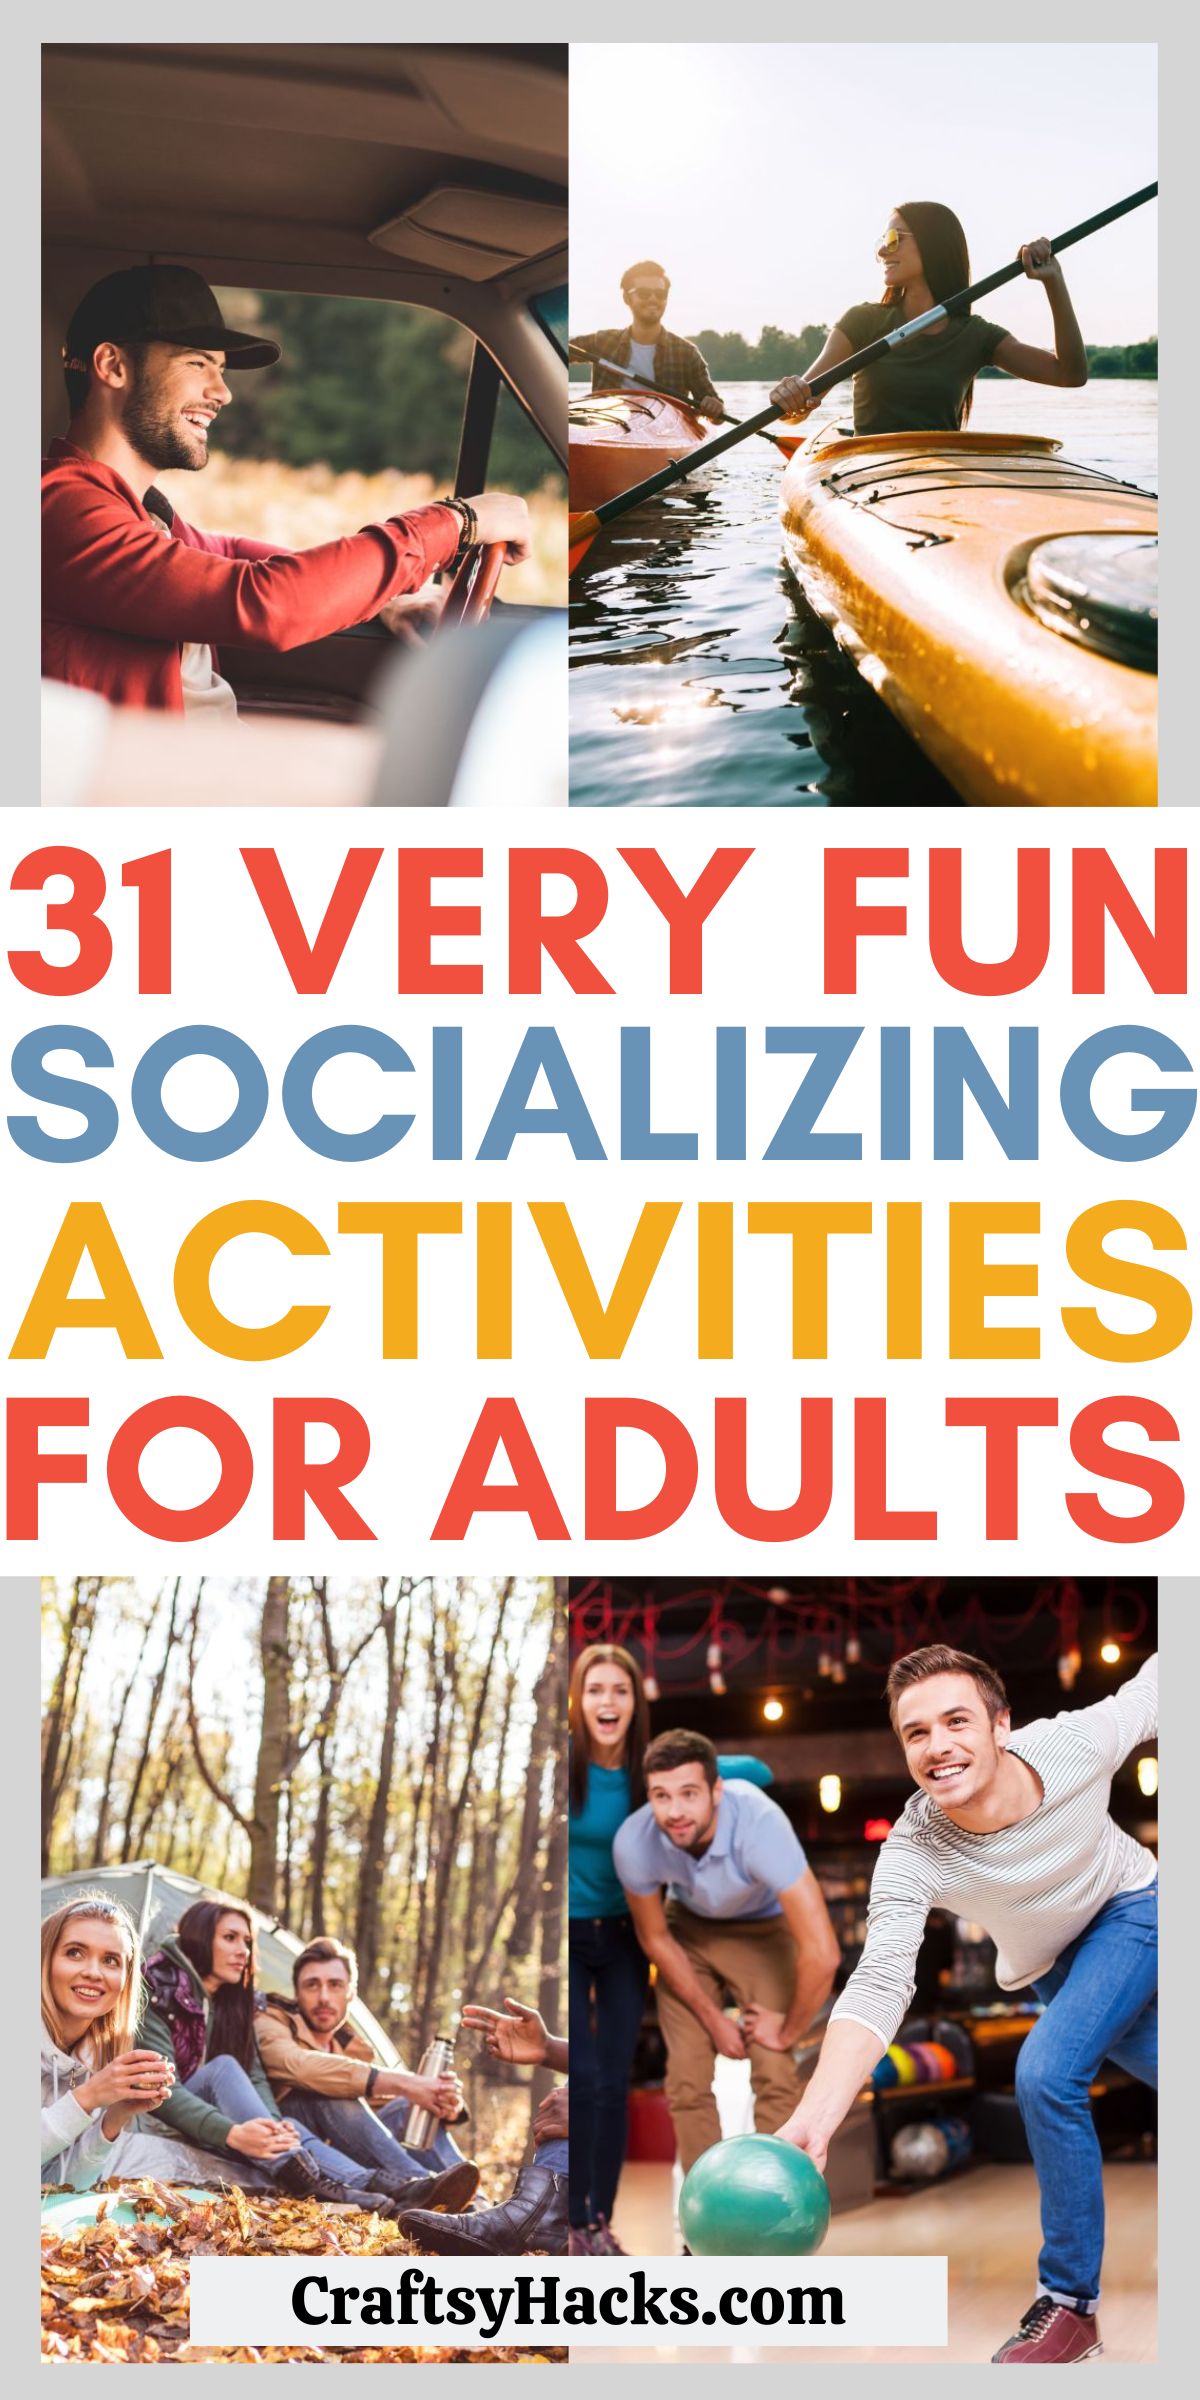 socializing activities for adults